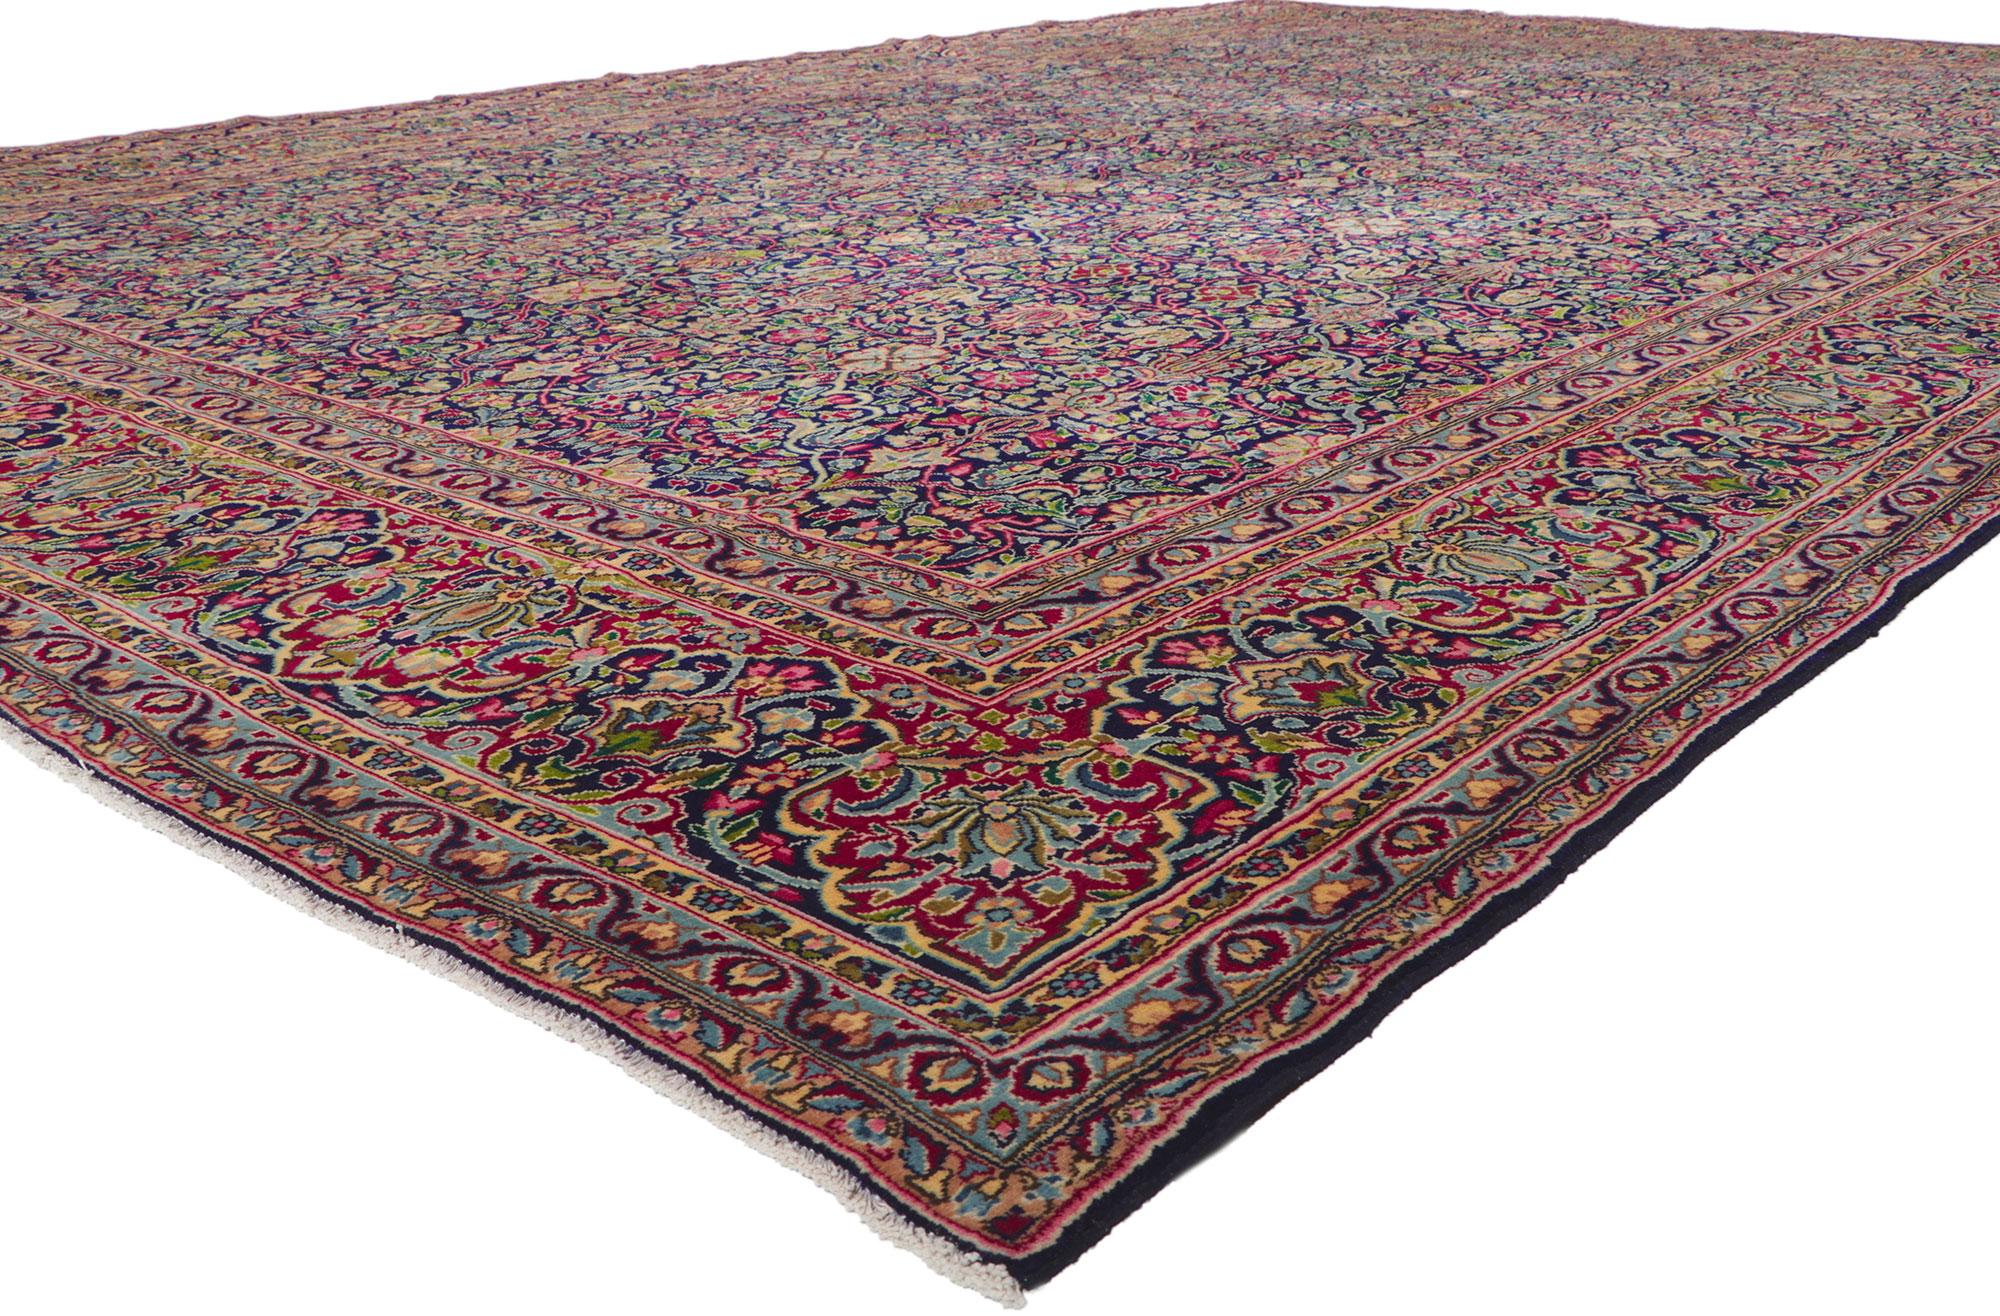 61202 antique Persian Kerman rug 11'04 x 16'11. ?Eminating a timeless design and beguiling beauty, this hand-knotted wool antique Persian Kerman rug is poised to impress. The overall composition beautifully embodies the refinement from the Victorian